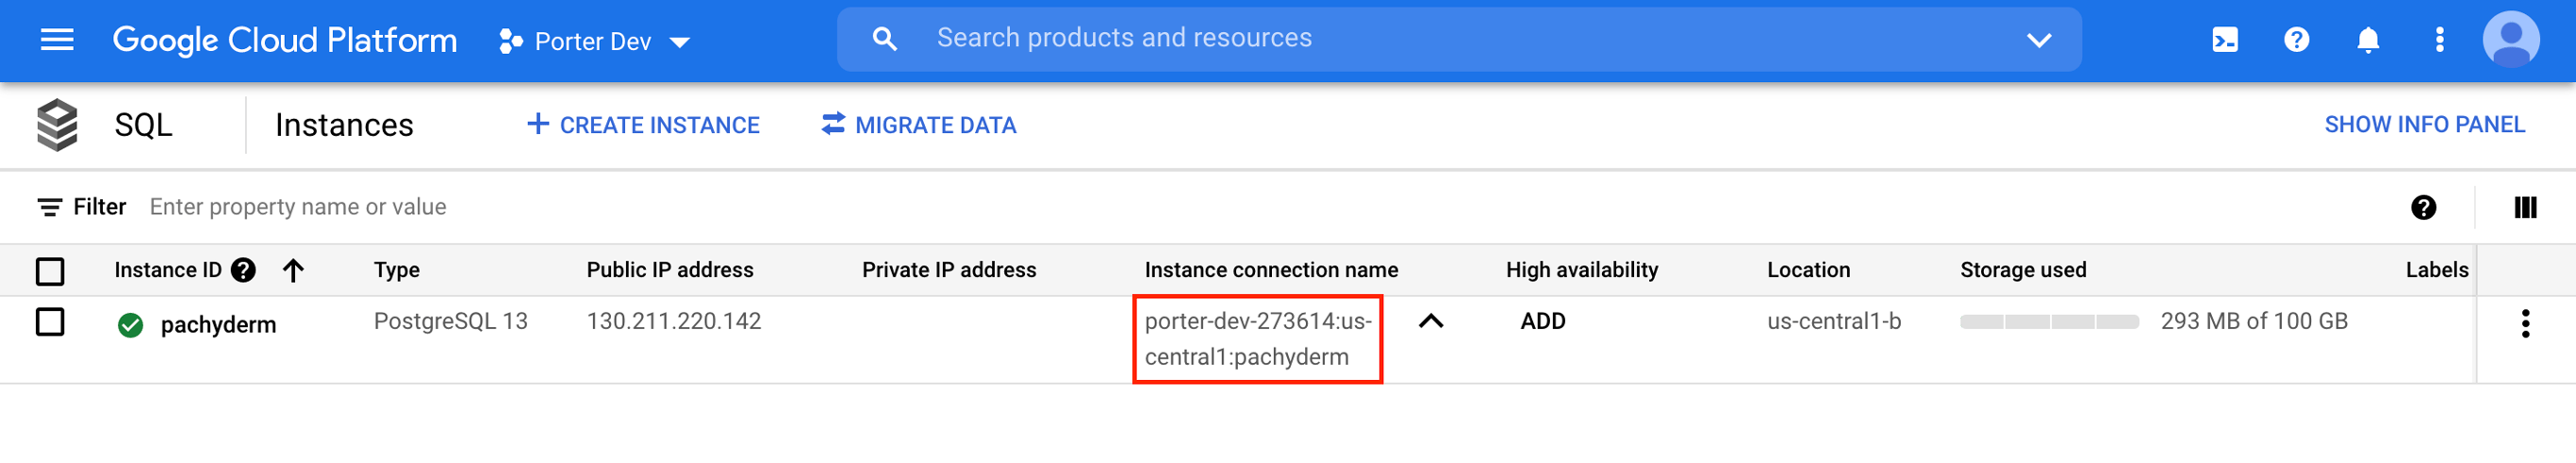 Instance connection name